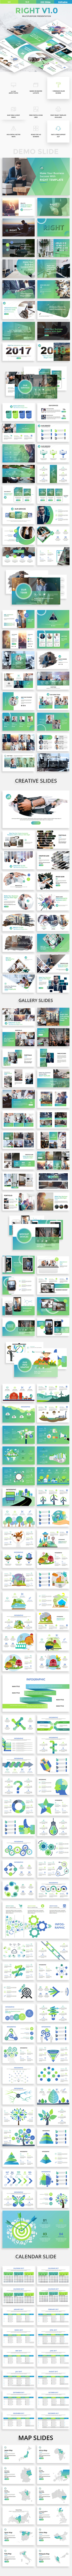 Right Multipurpose Powerpoint Template